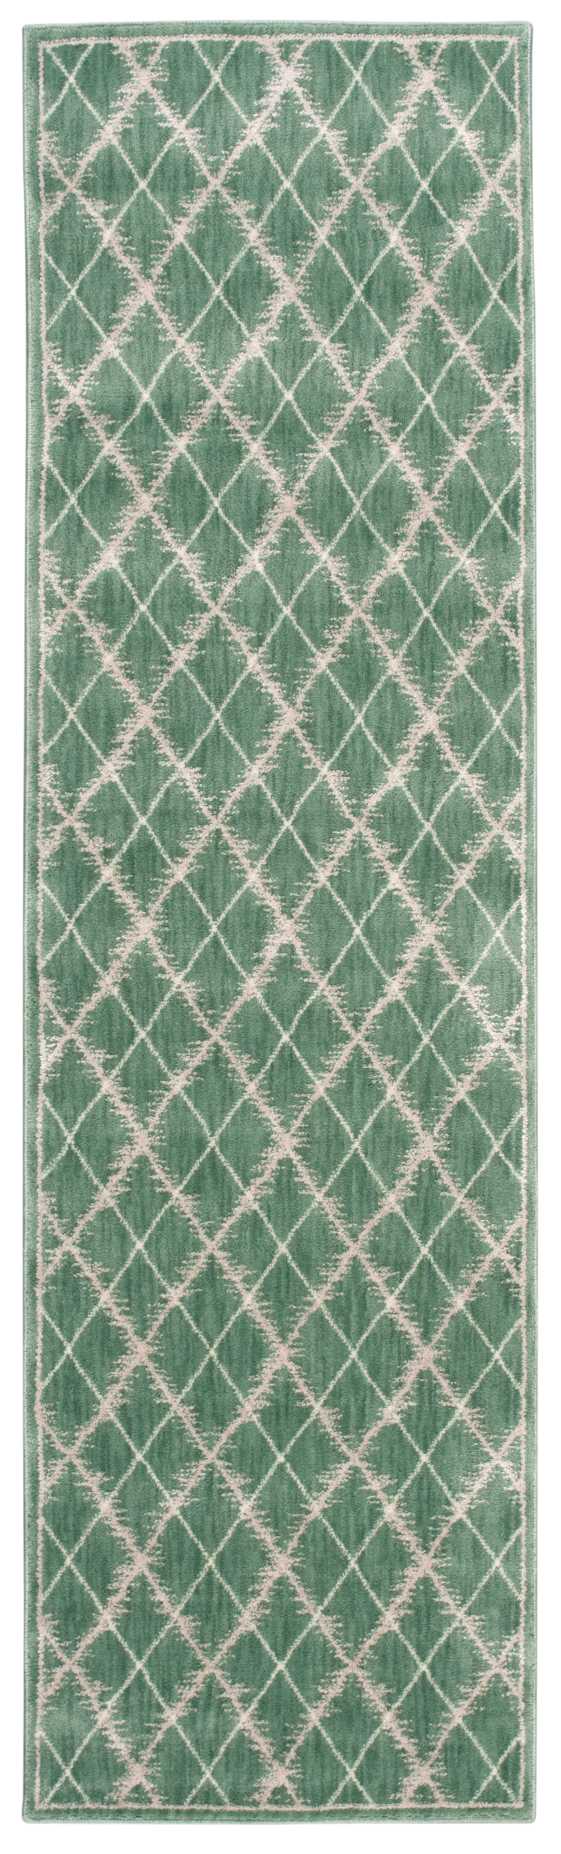 Nourison Home Tranquility TNQ01 Light Green Transitional Machinemade Rug